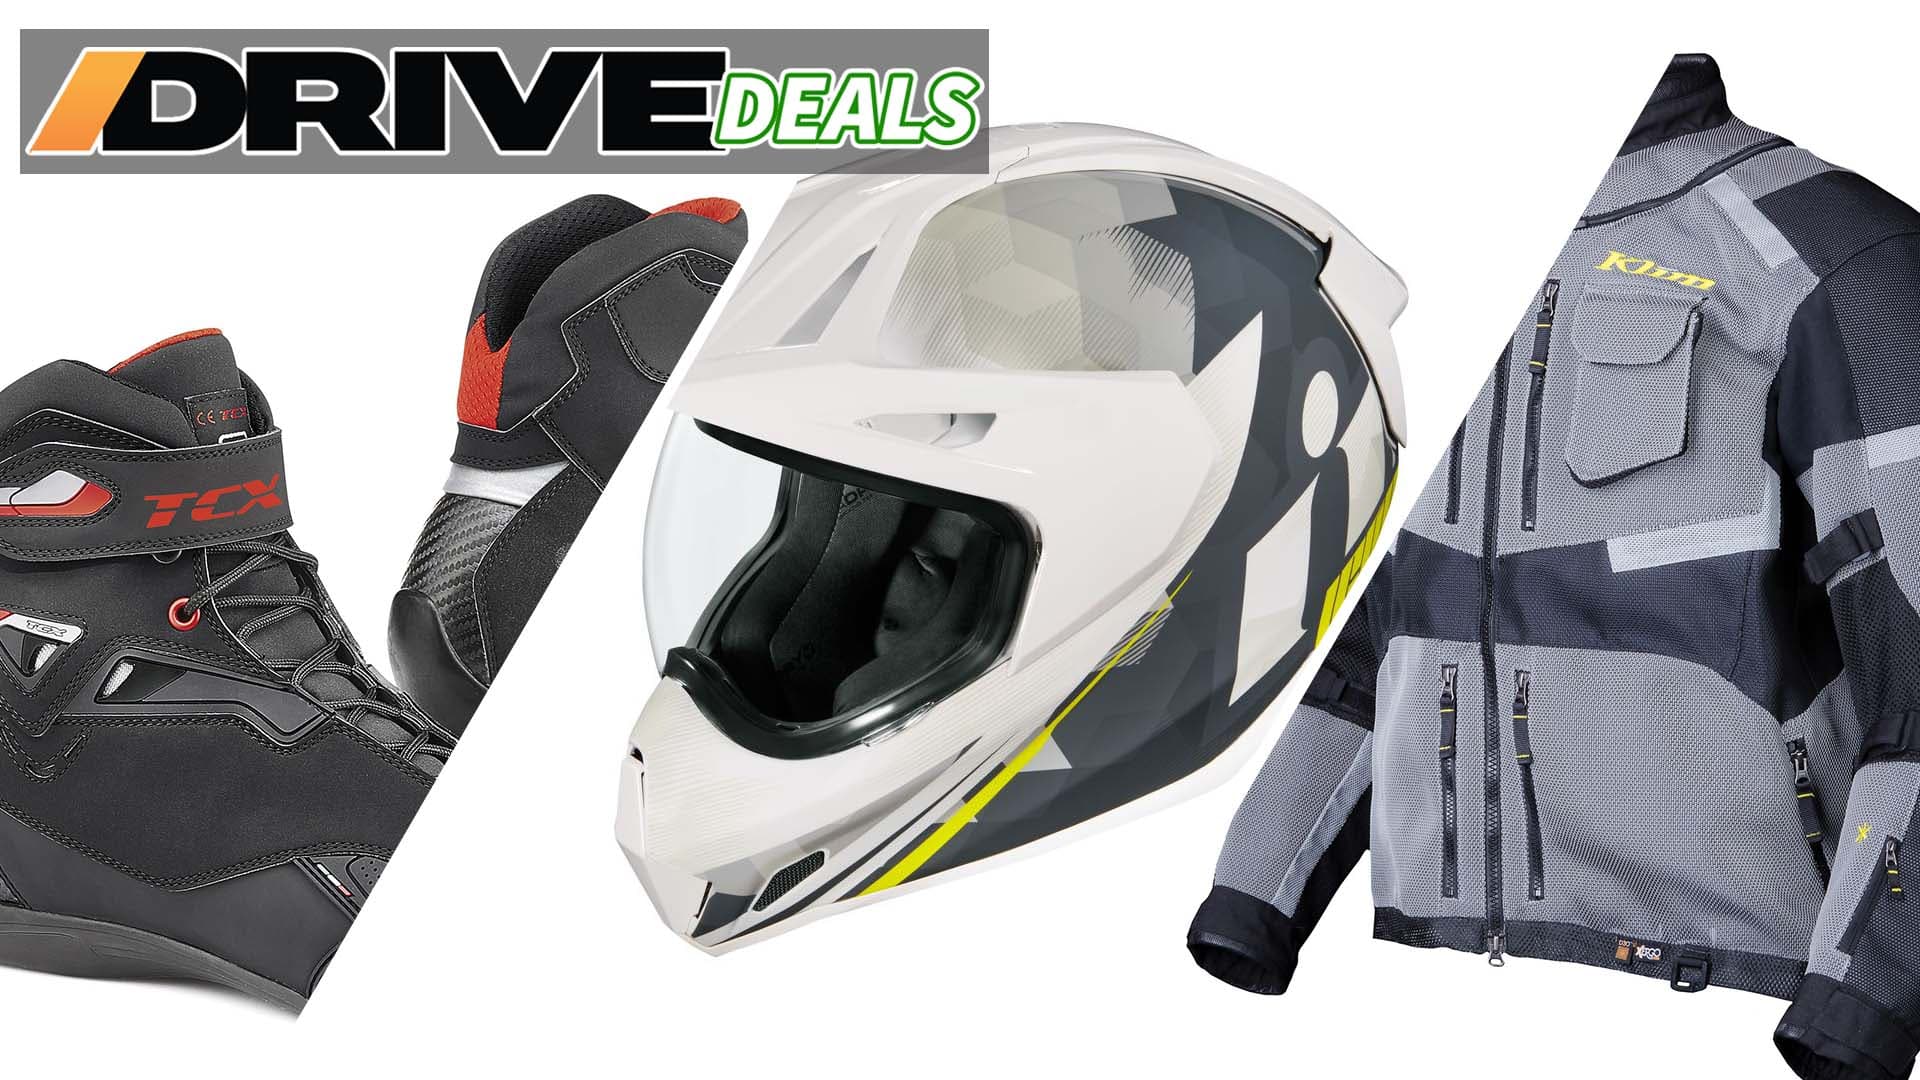 Save $200 on Helmets at Motosport and More Two-Wheel Deals From Amazon